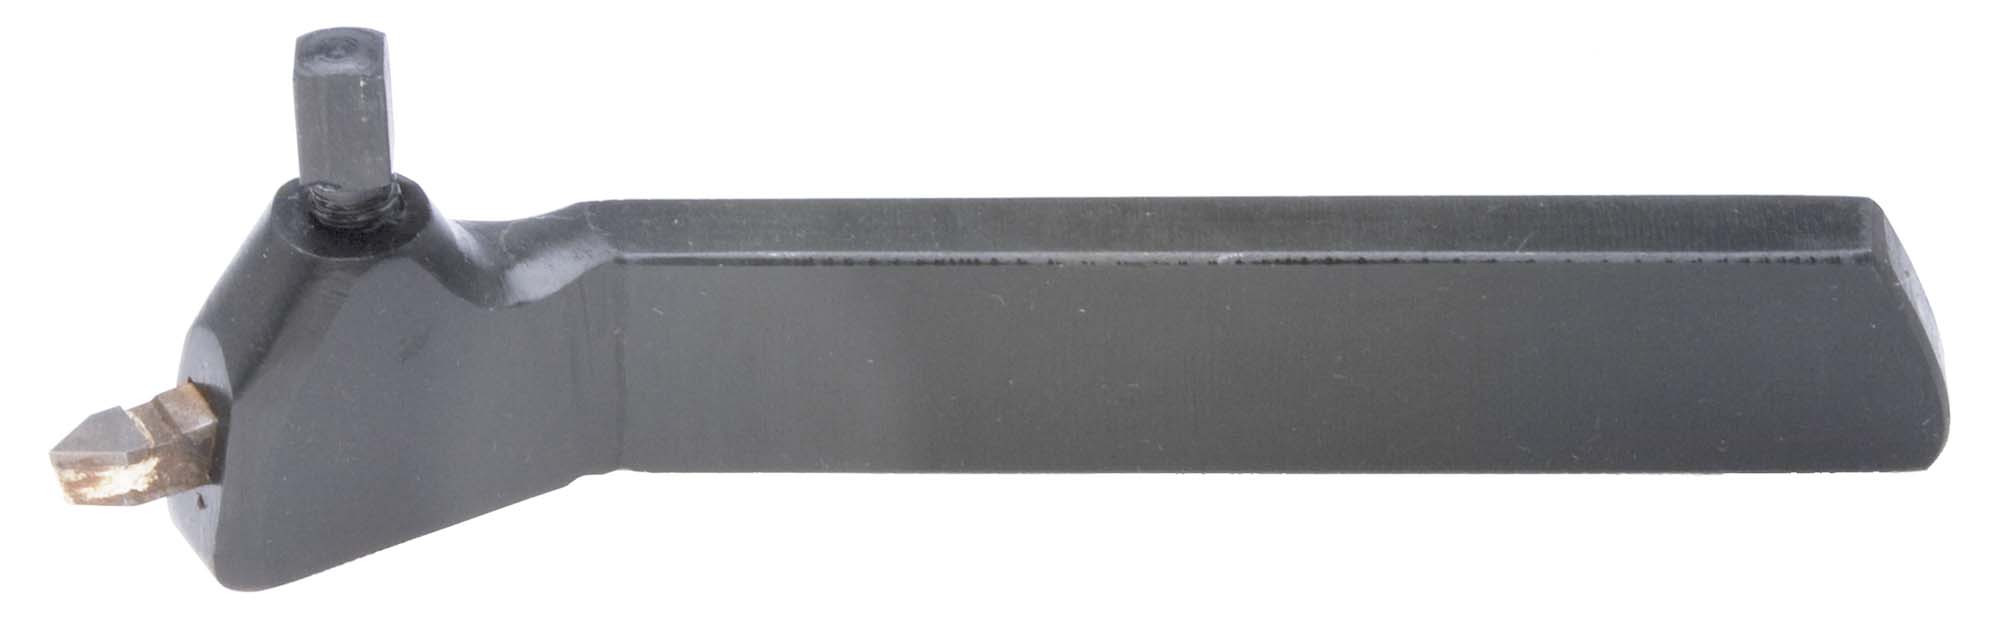 3/8 X 7/8 Right Hand Lathe Tool Holder for 1/4" Carbide Tip Toolbits